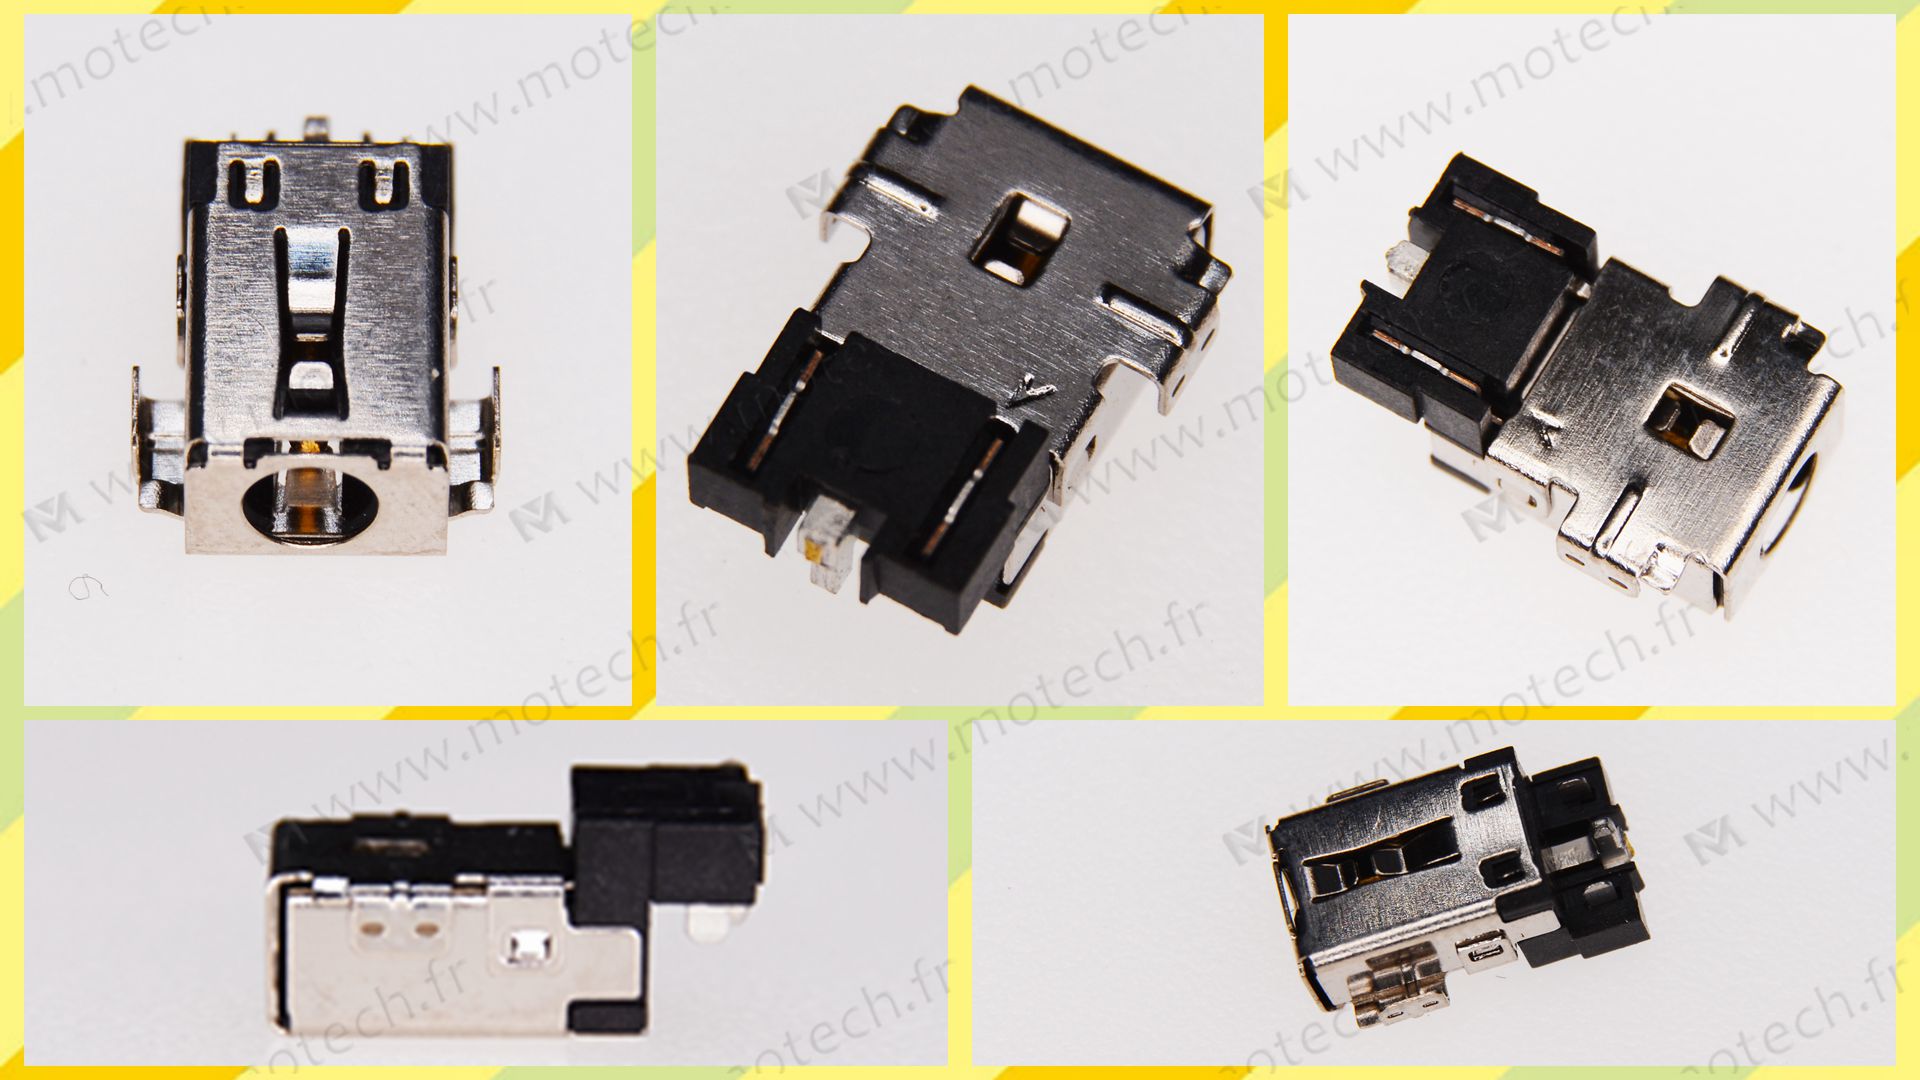 Acer SF514-54T charging connector, Acer SF514-54T DC Power Jack, Acer SF514-54T Power Jack, Acer SF514-54T plug, Acer SF514-54T Jack socket, Acer SF514-54T connecteur de charge, 